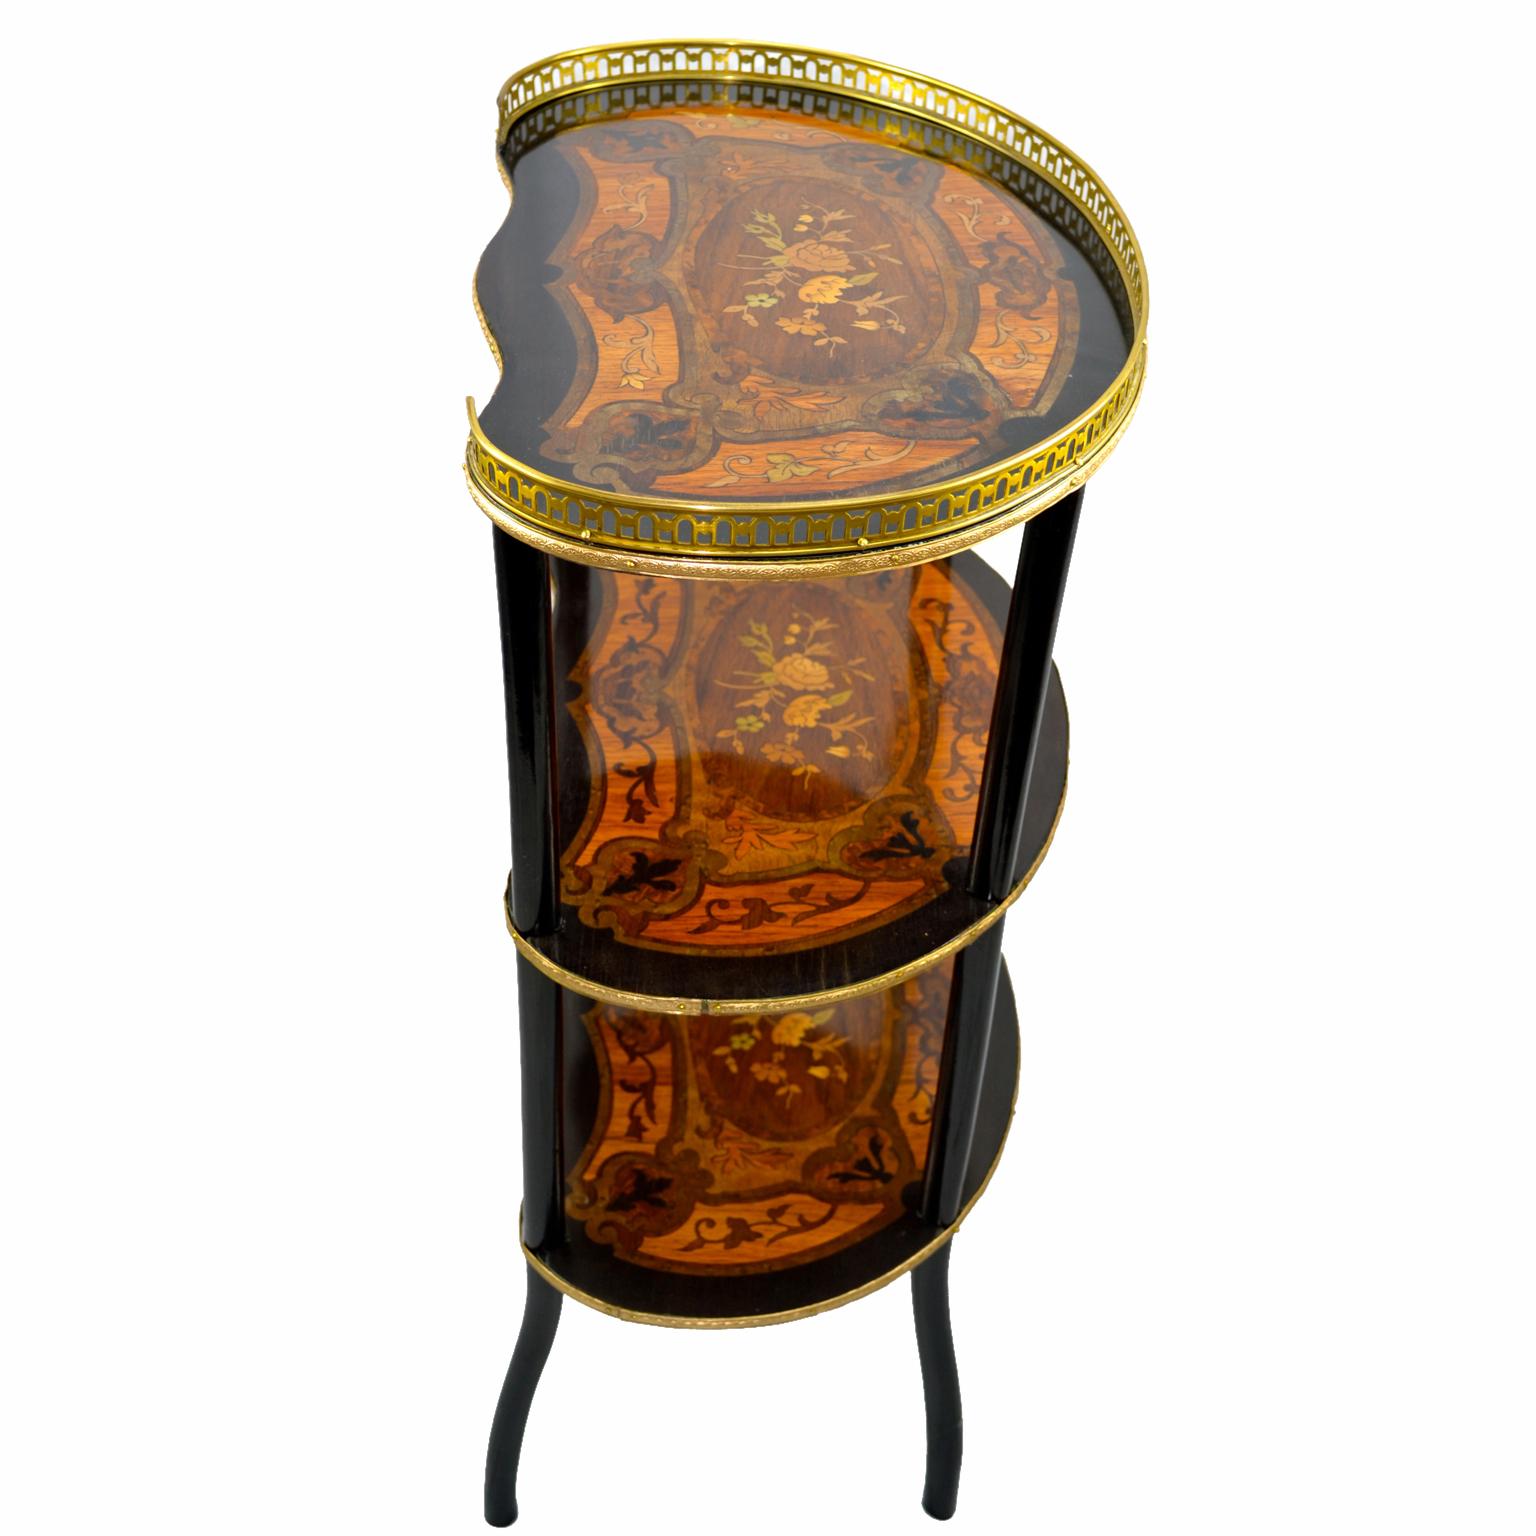 A beautifully inlaid three-tier kidney shaped desert table, each tier has an ebonized border, the four shaped legs are also ebonized. Each tier is inlaid with the same pattern of exotic woods with a central cartouche of roses. The top has a gilded